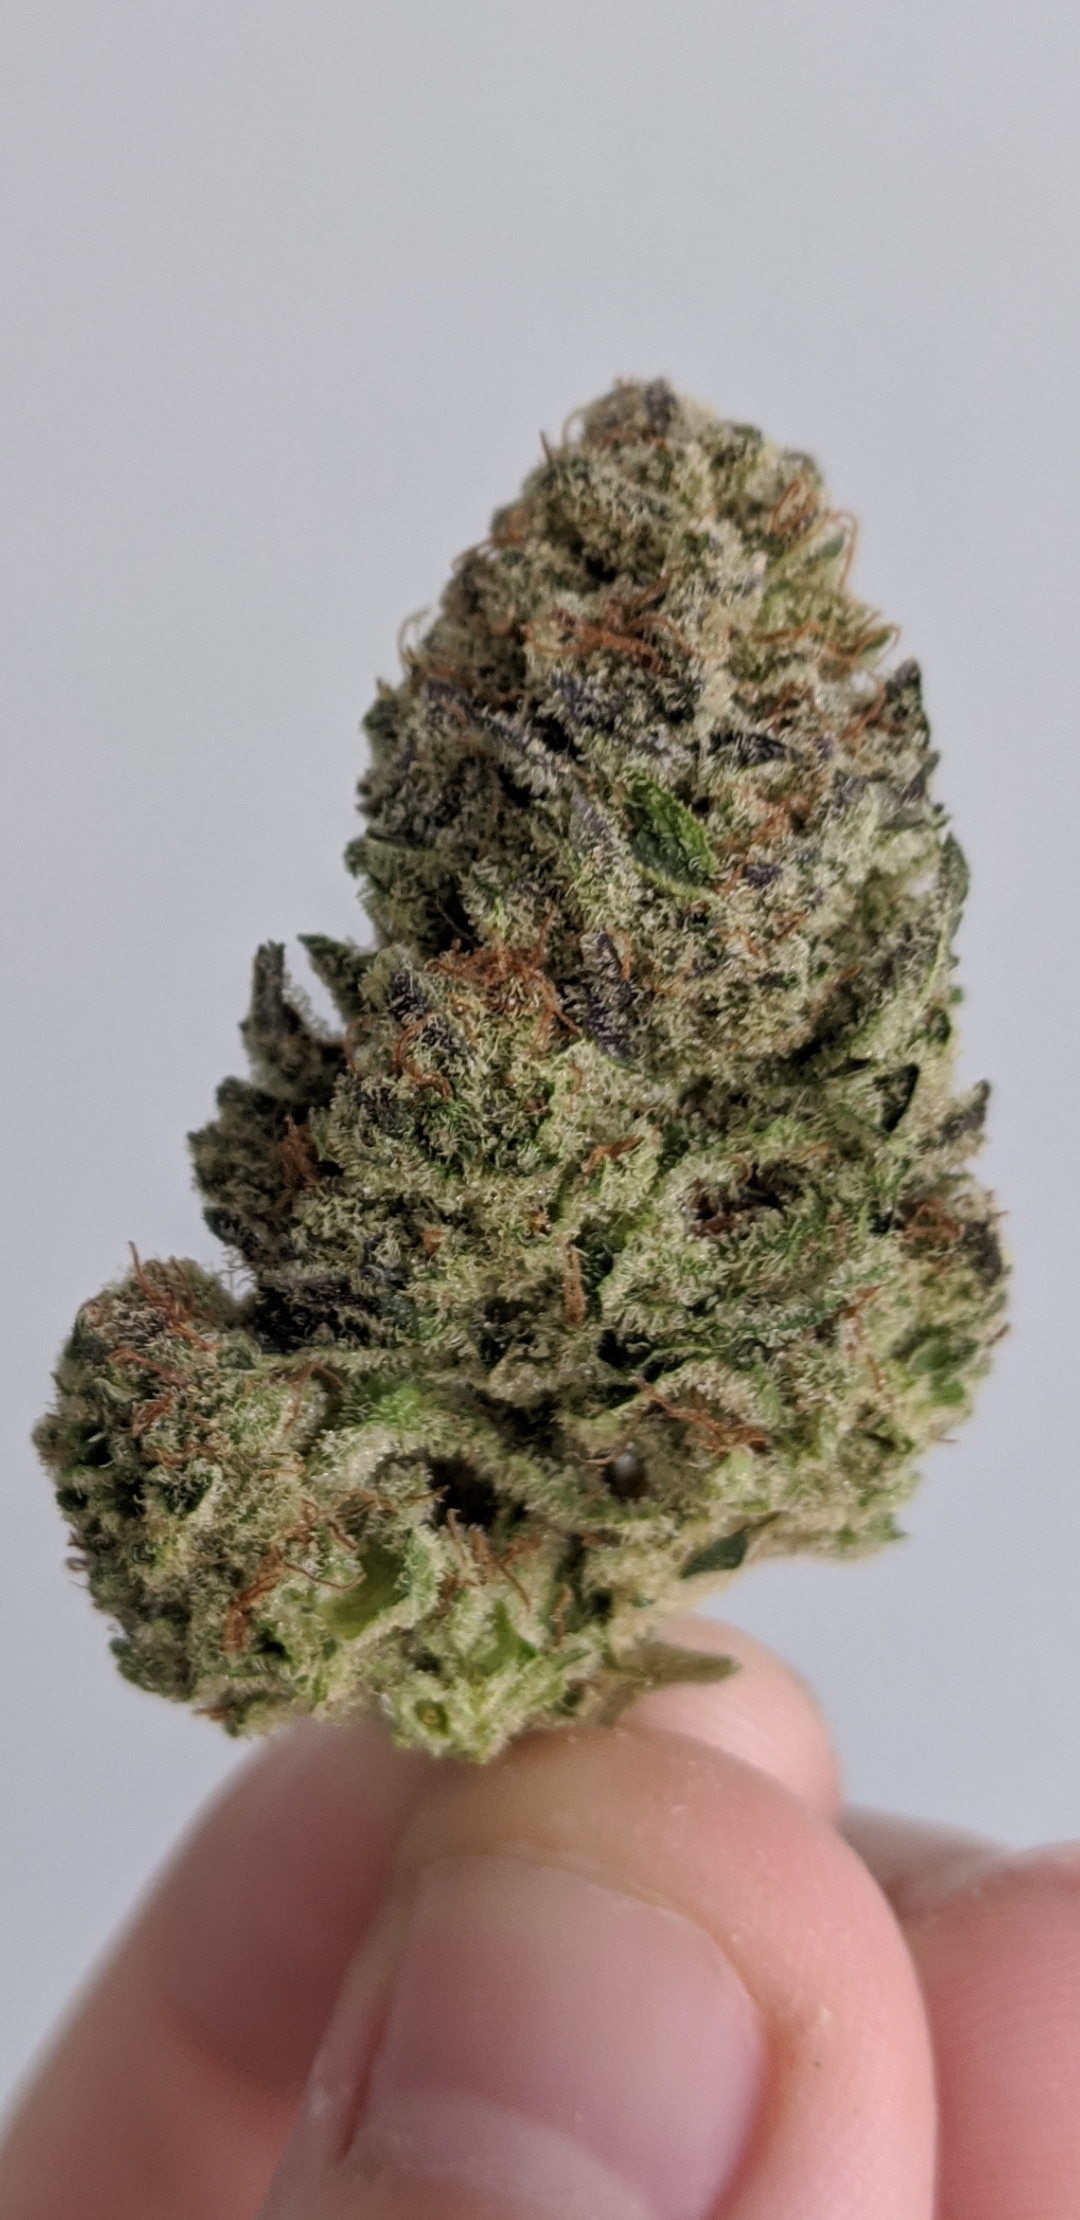 Mandarin Triangle Kush - A Potent And Flavorful Indica Hybrid